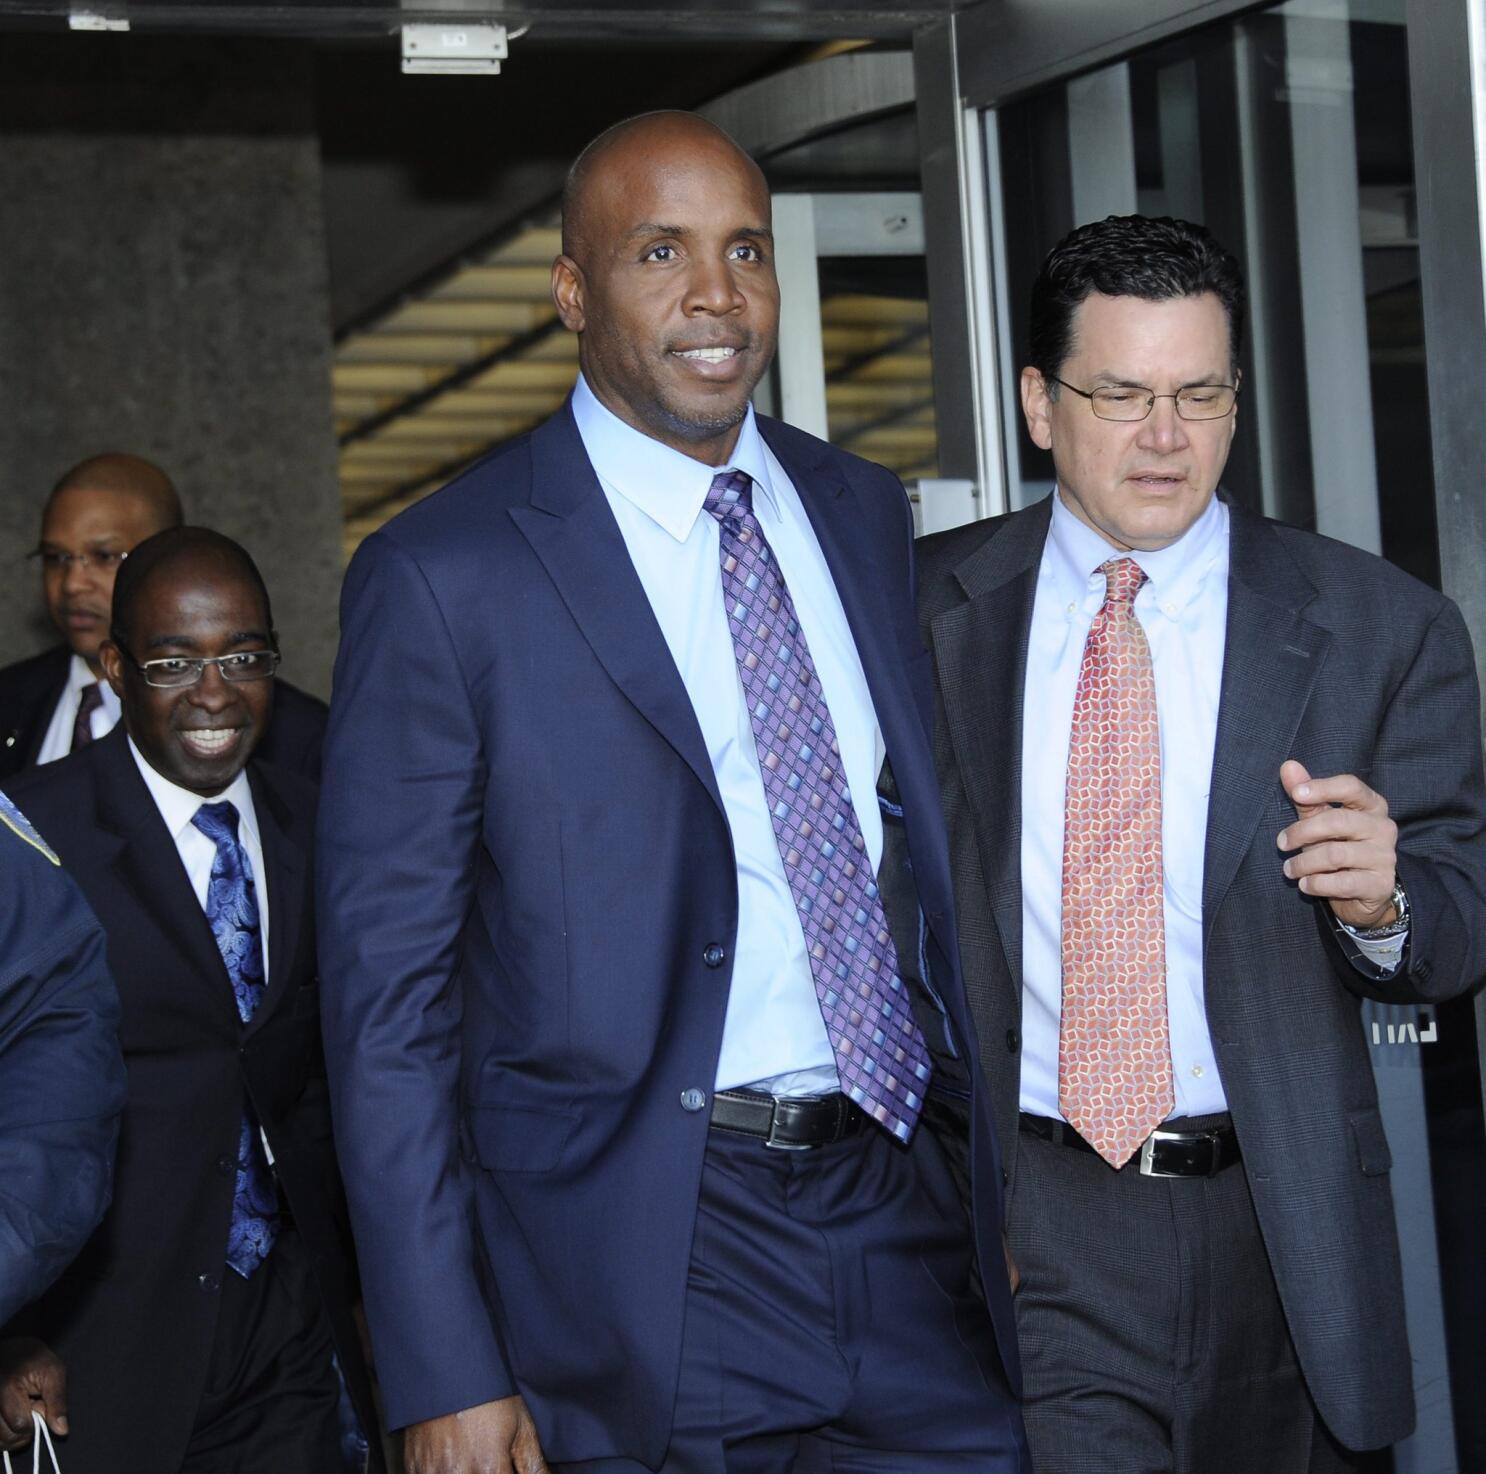 Home run king Barry Bonds obstruction conviction upheld – The